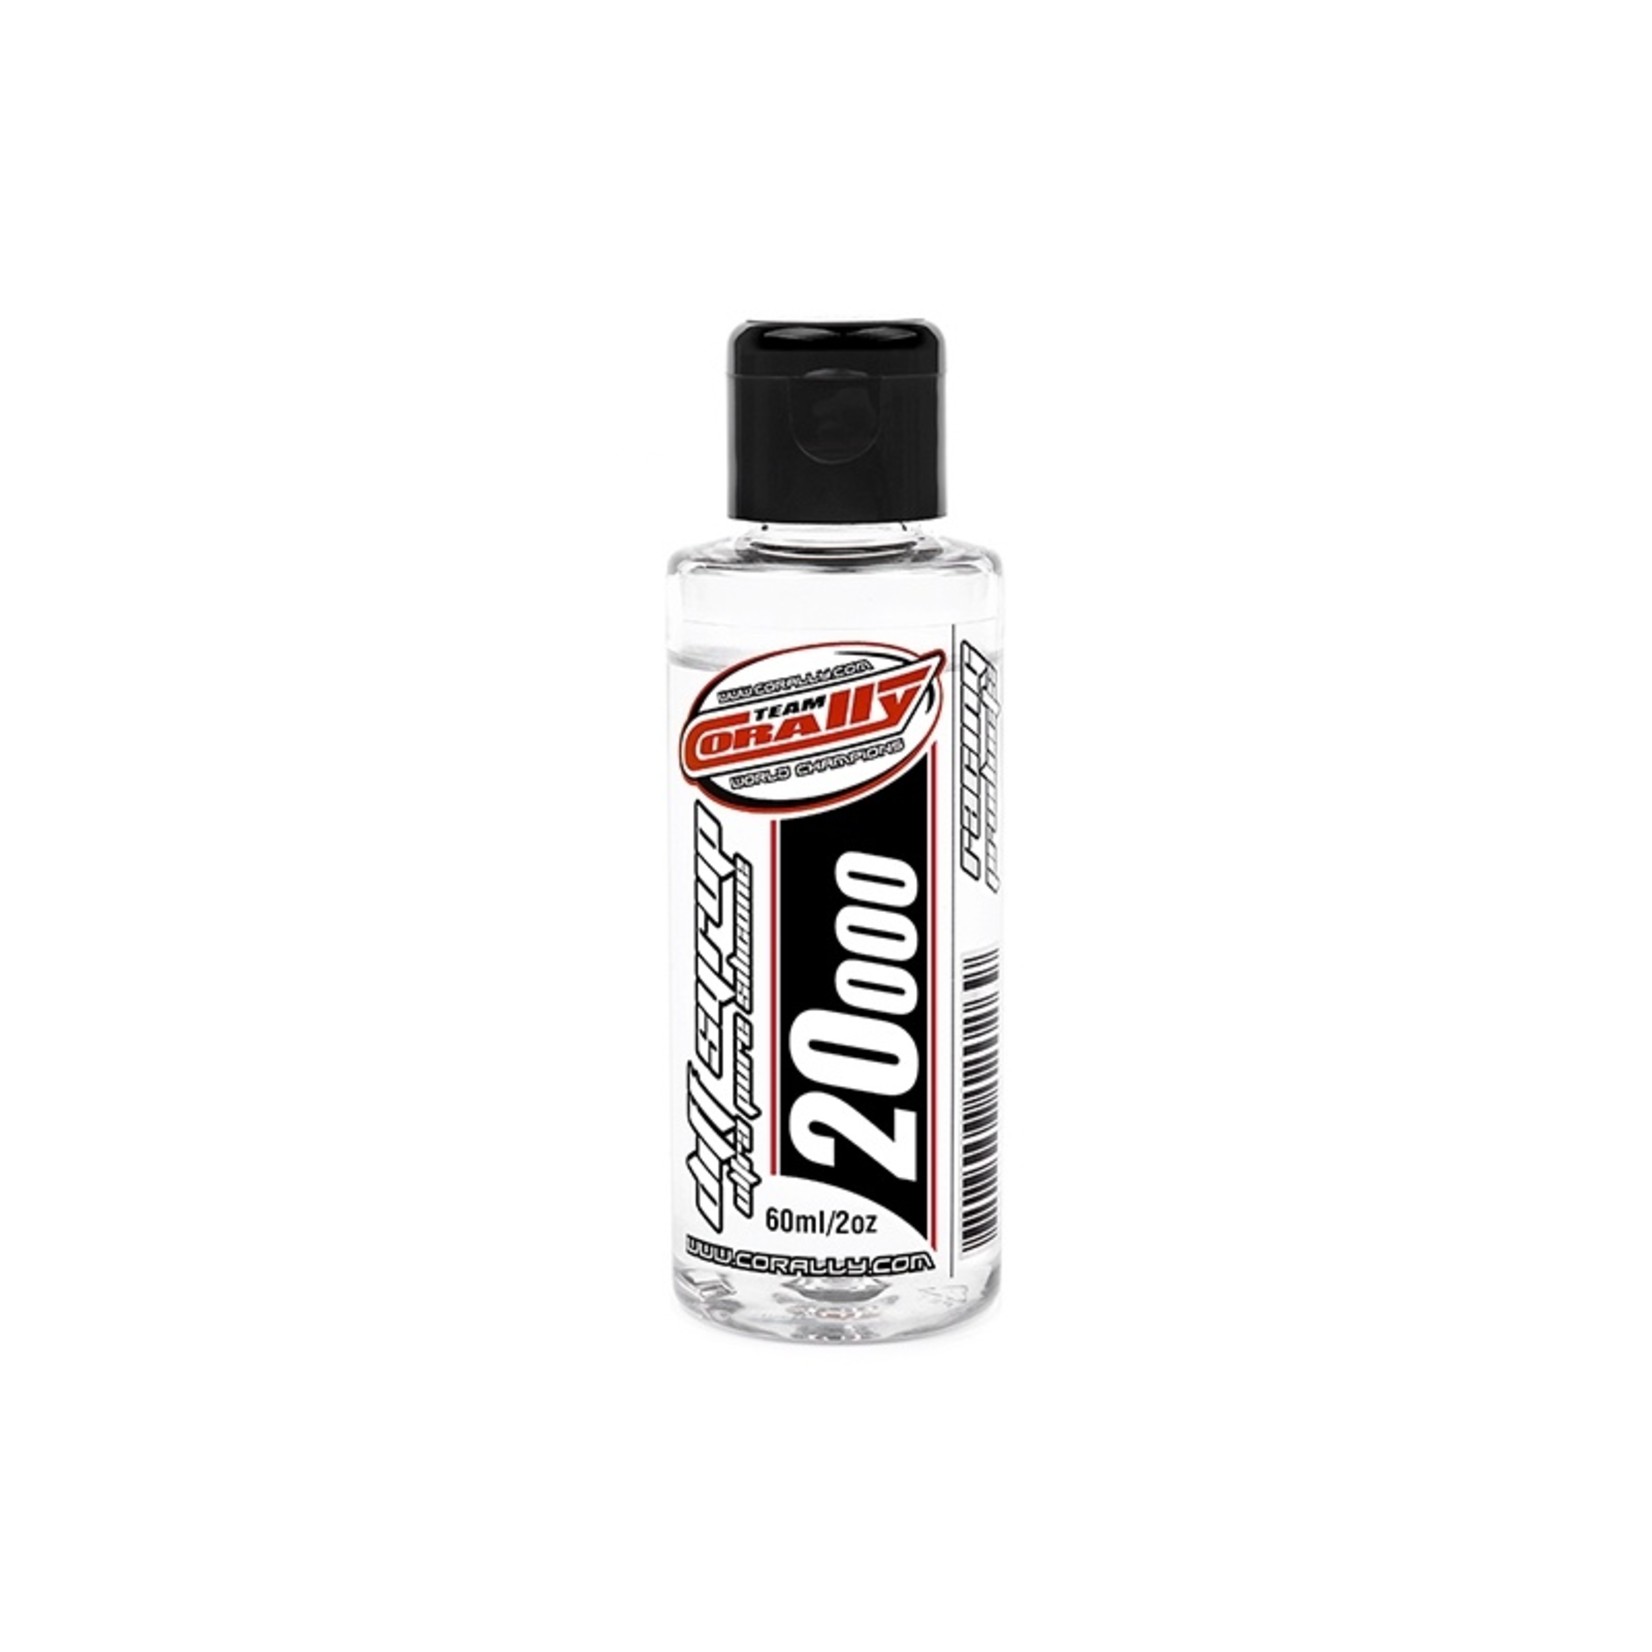 Corally (Team Corally) Ultra Pure Silicone Diff Oil (Syrup) - 20000 CPS - 60ml